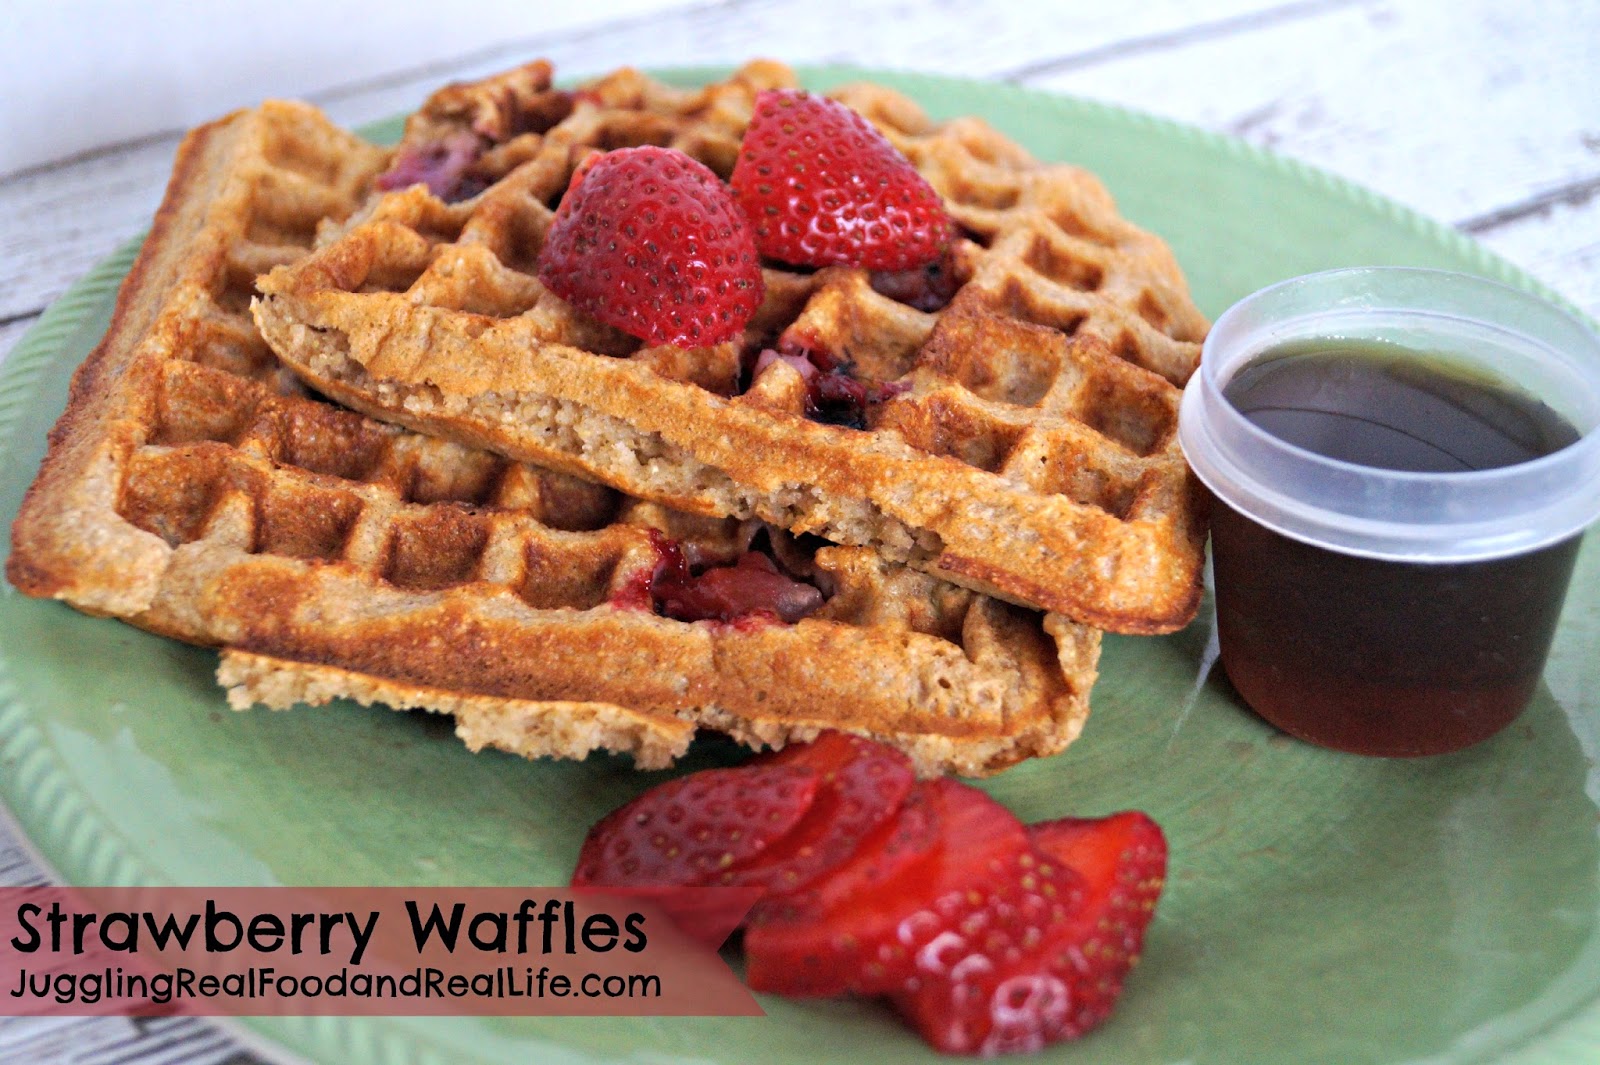 Easy Real Food Recipes: Strawberry Waffles